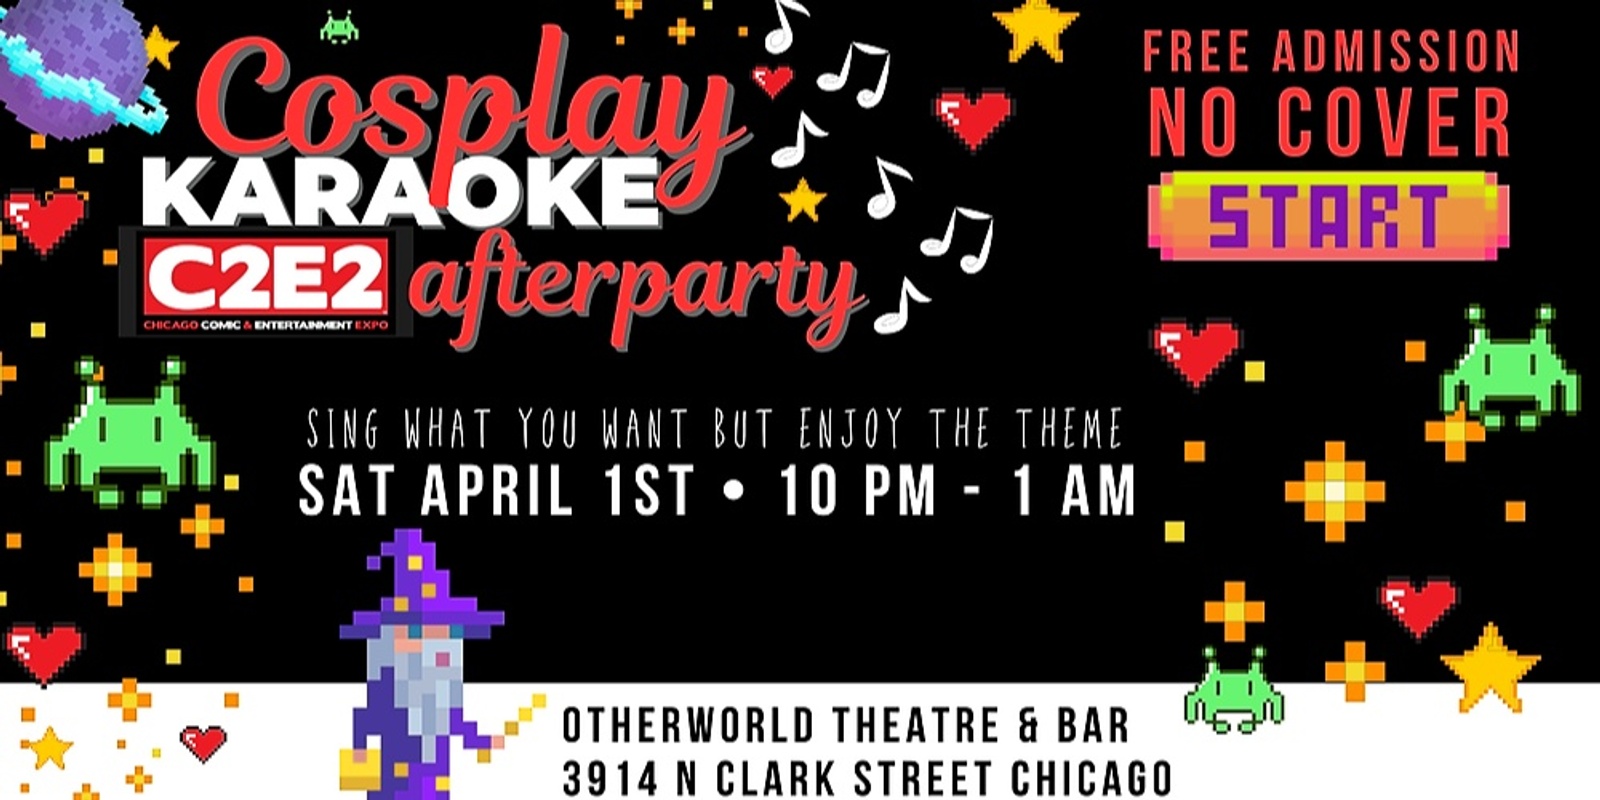 Cosplay Karaoke C2E2 Afterparty